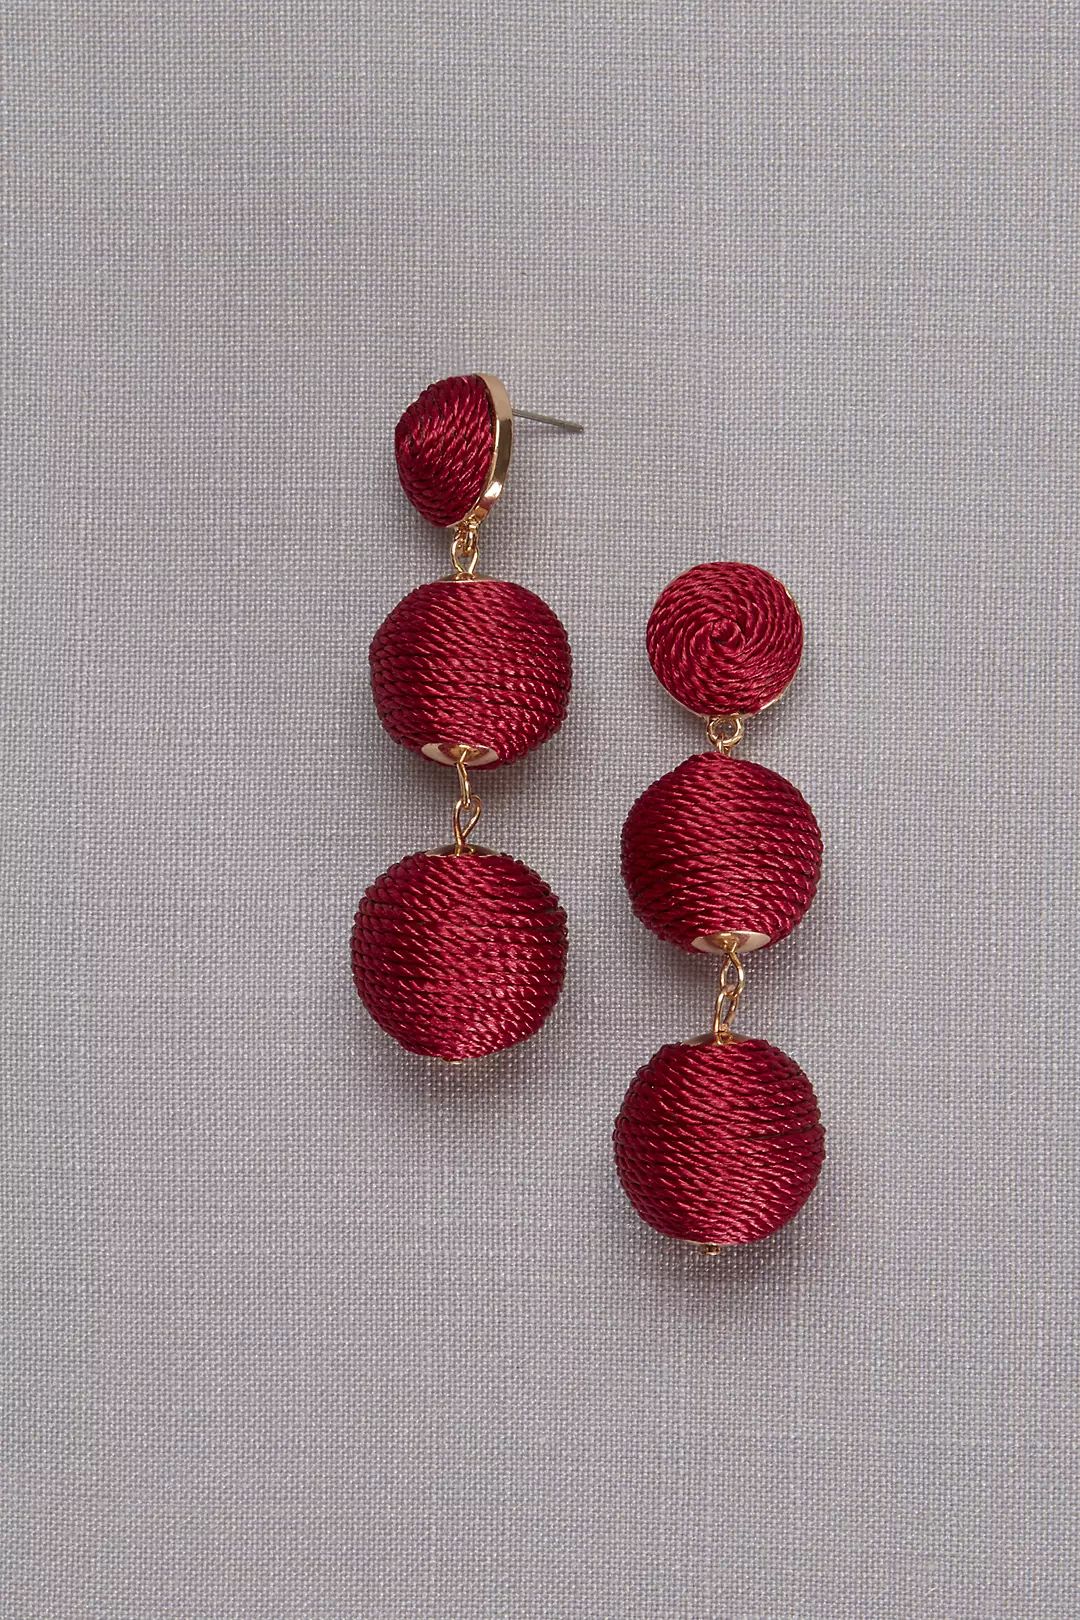 Thread-Wrapped Orb Drop Earrings Image